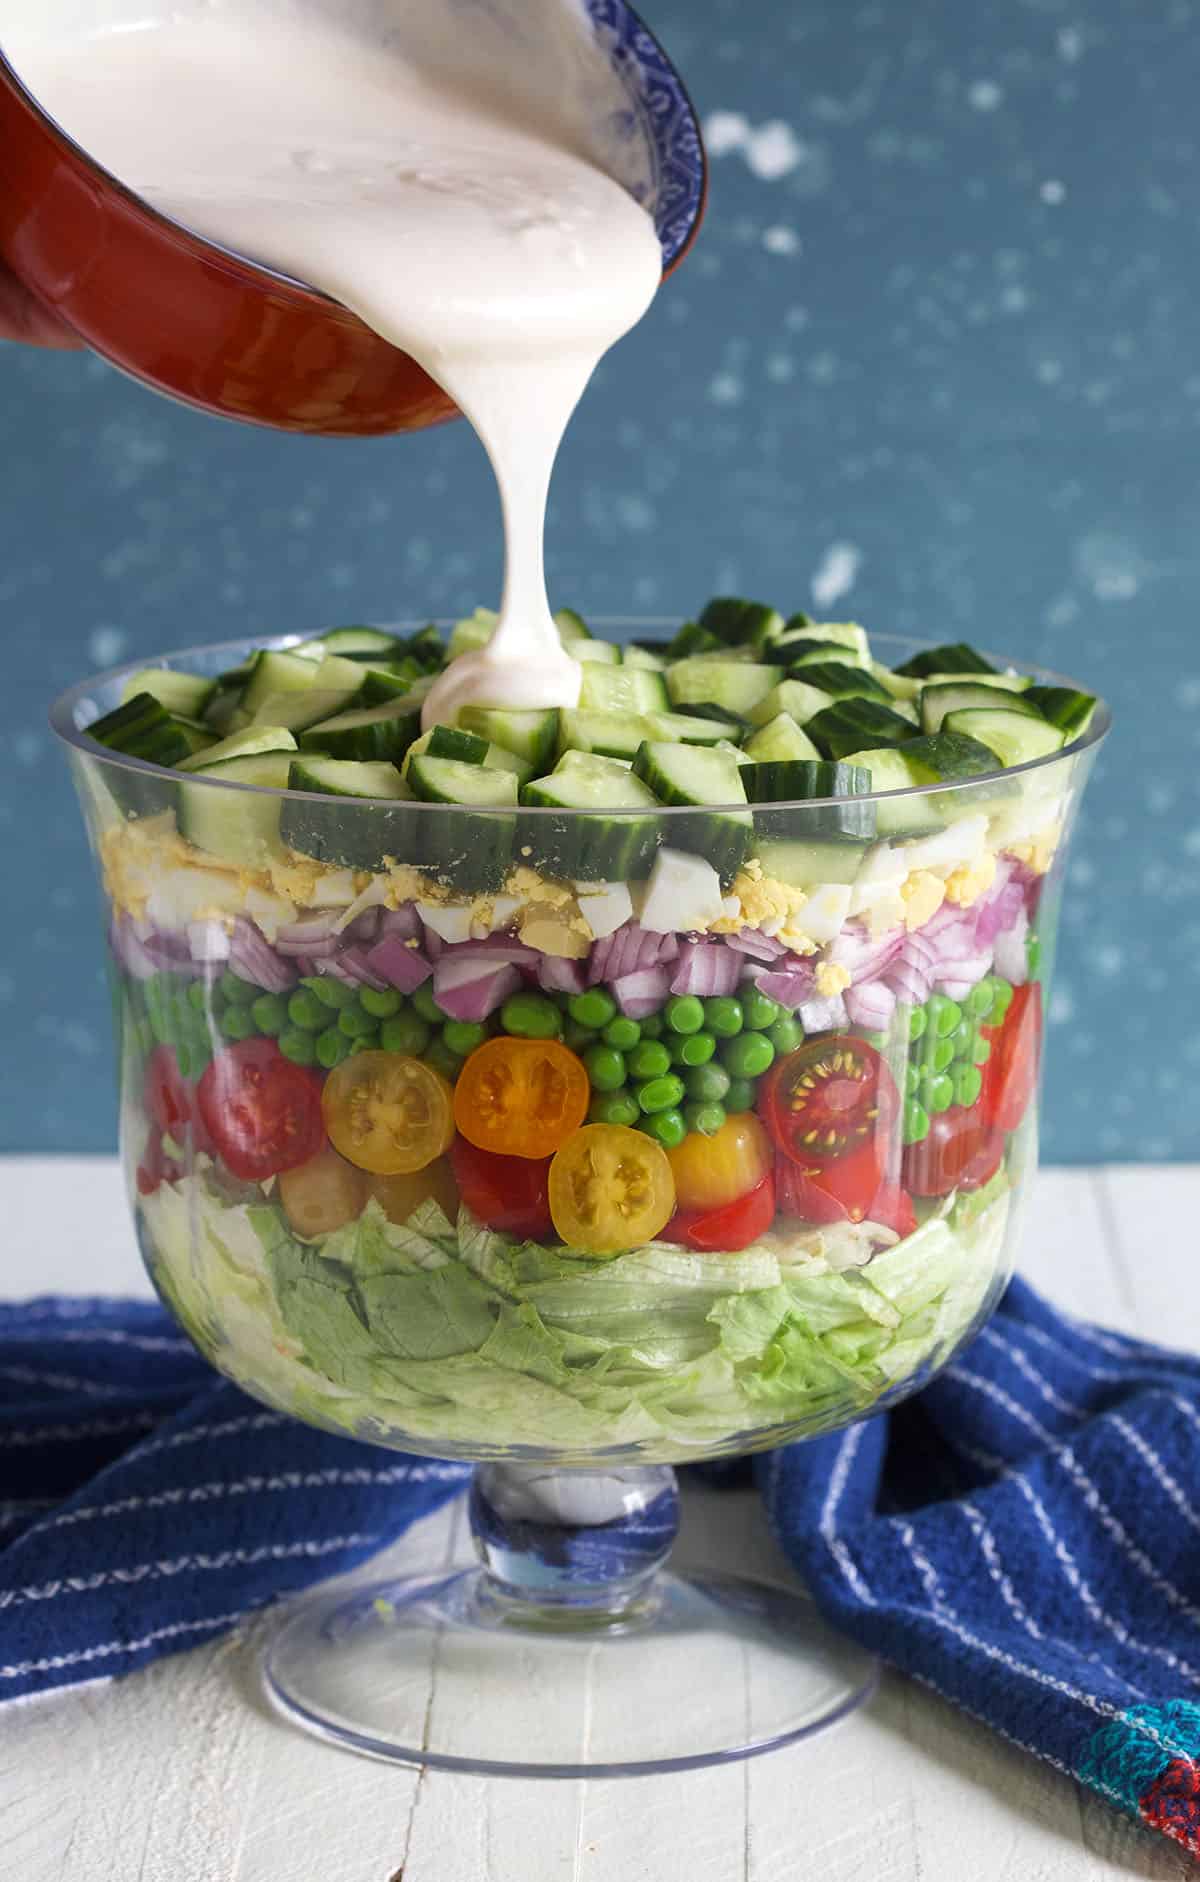 Dressing is being poured on top of an assembled salad.